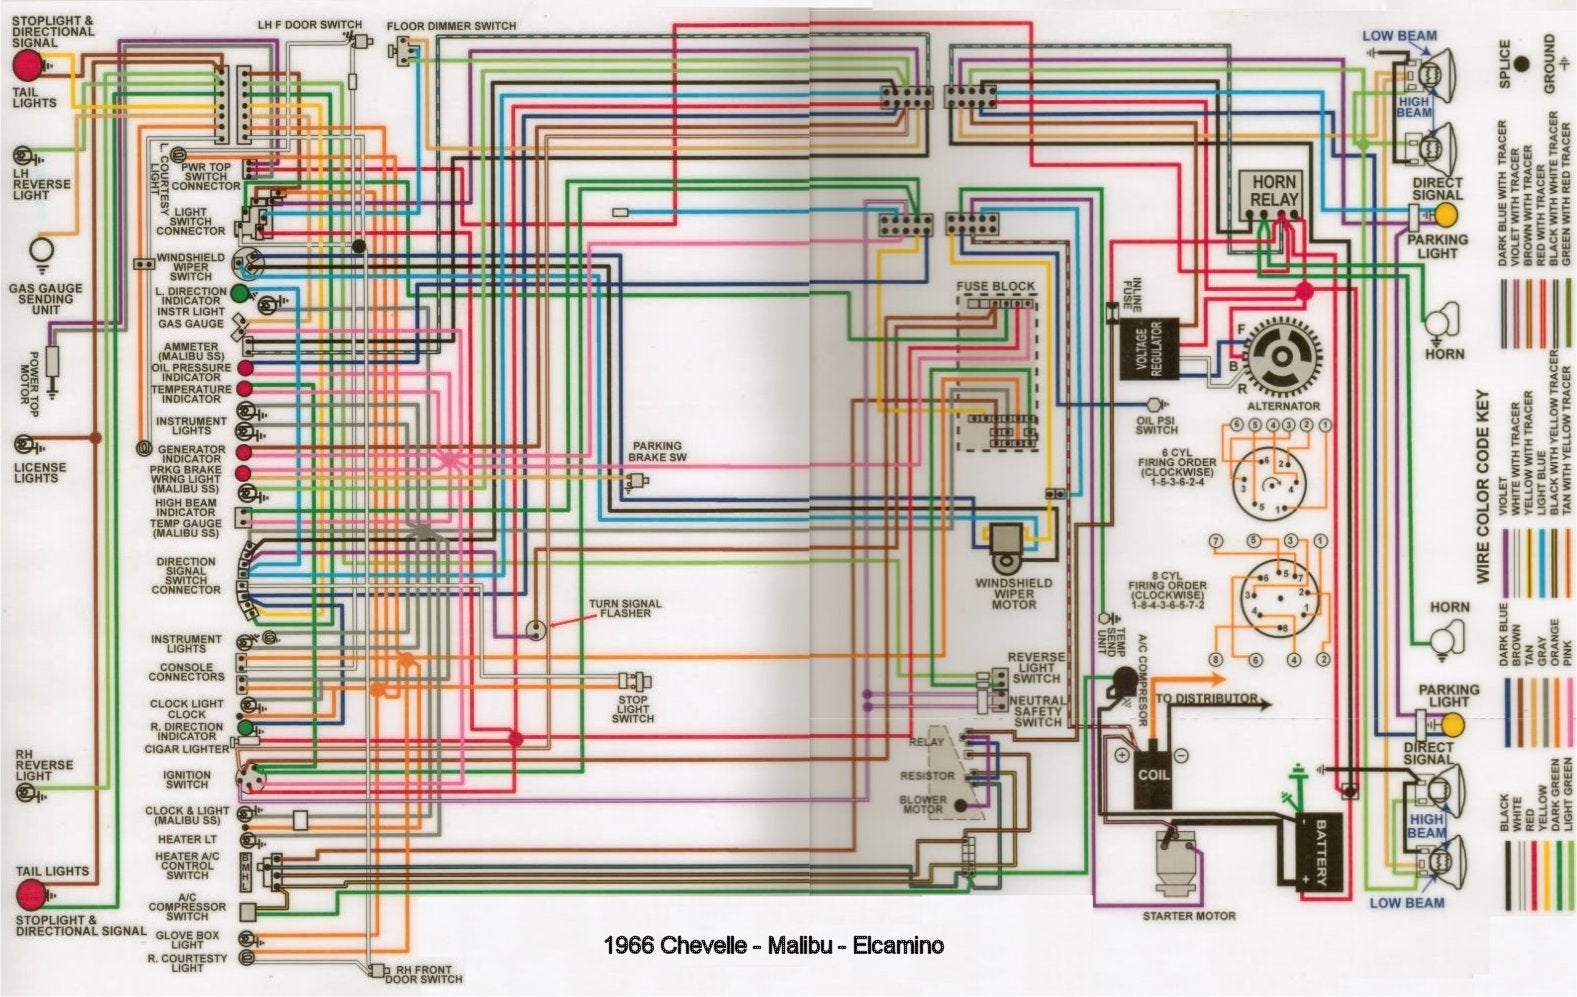 66 Chevelle Wiring Diagram Wiring Diagram Circuit Page Circuit Page Albergoinsicilia It